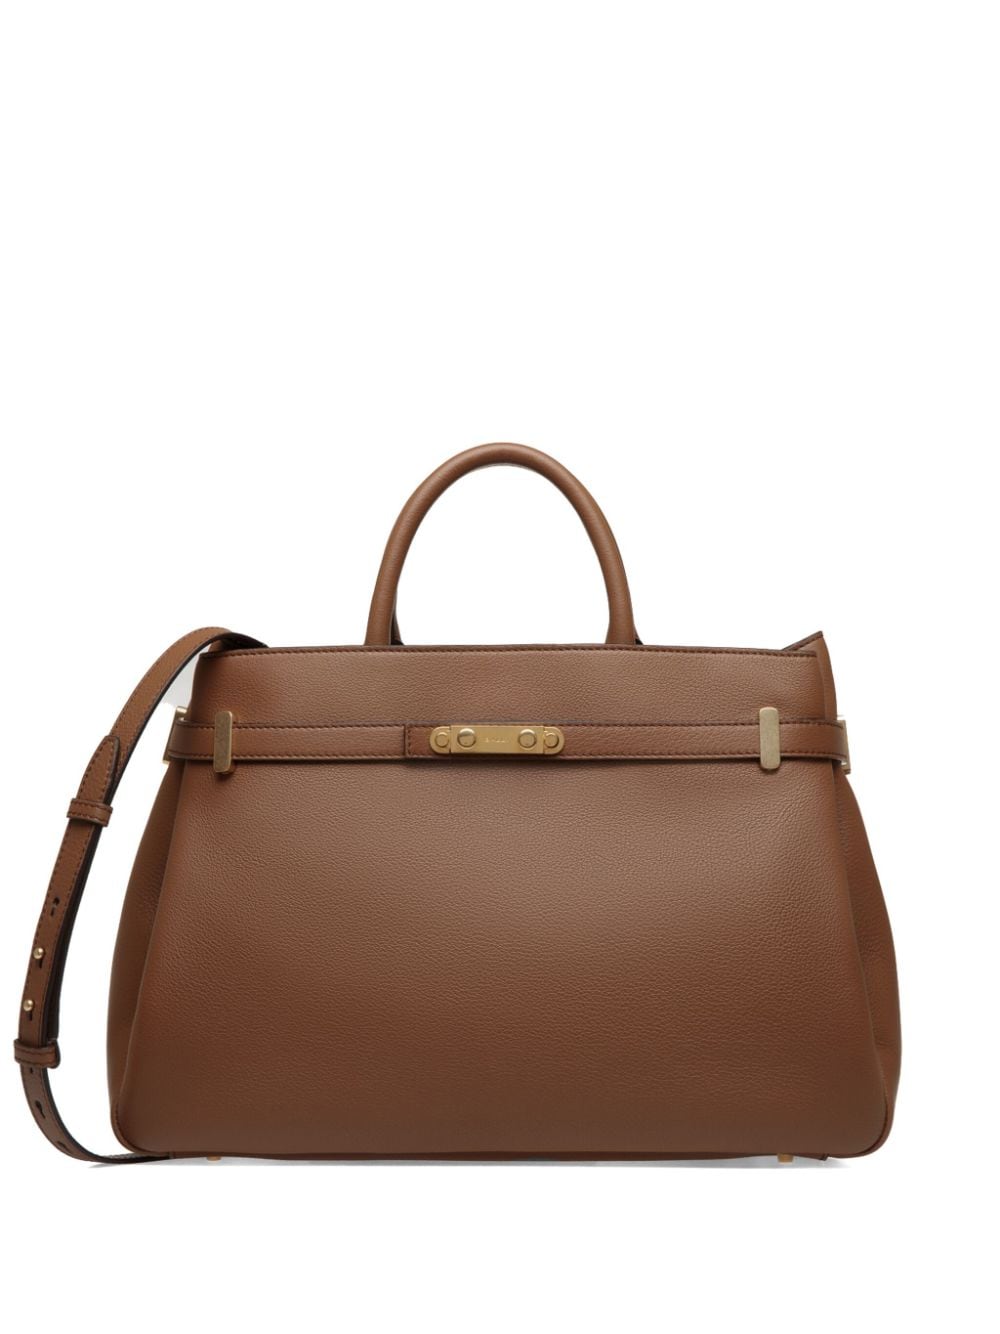 Bally Carriage Lock leather tote bag - Brown von Bally